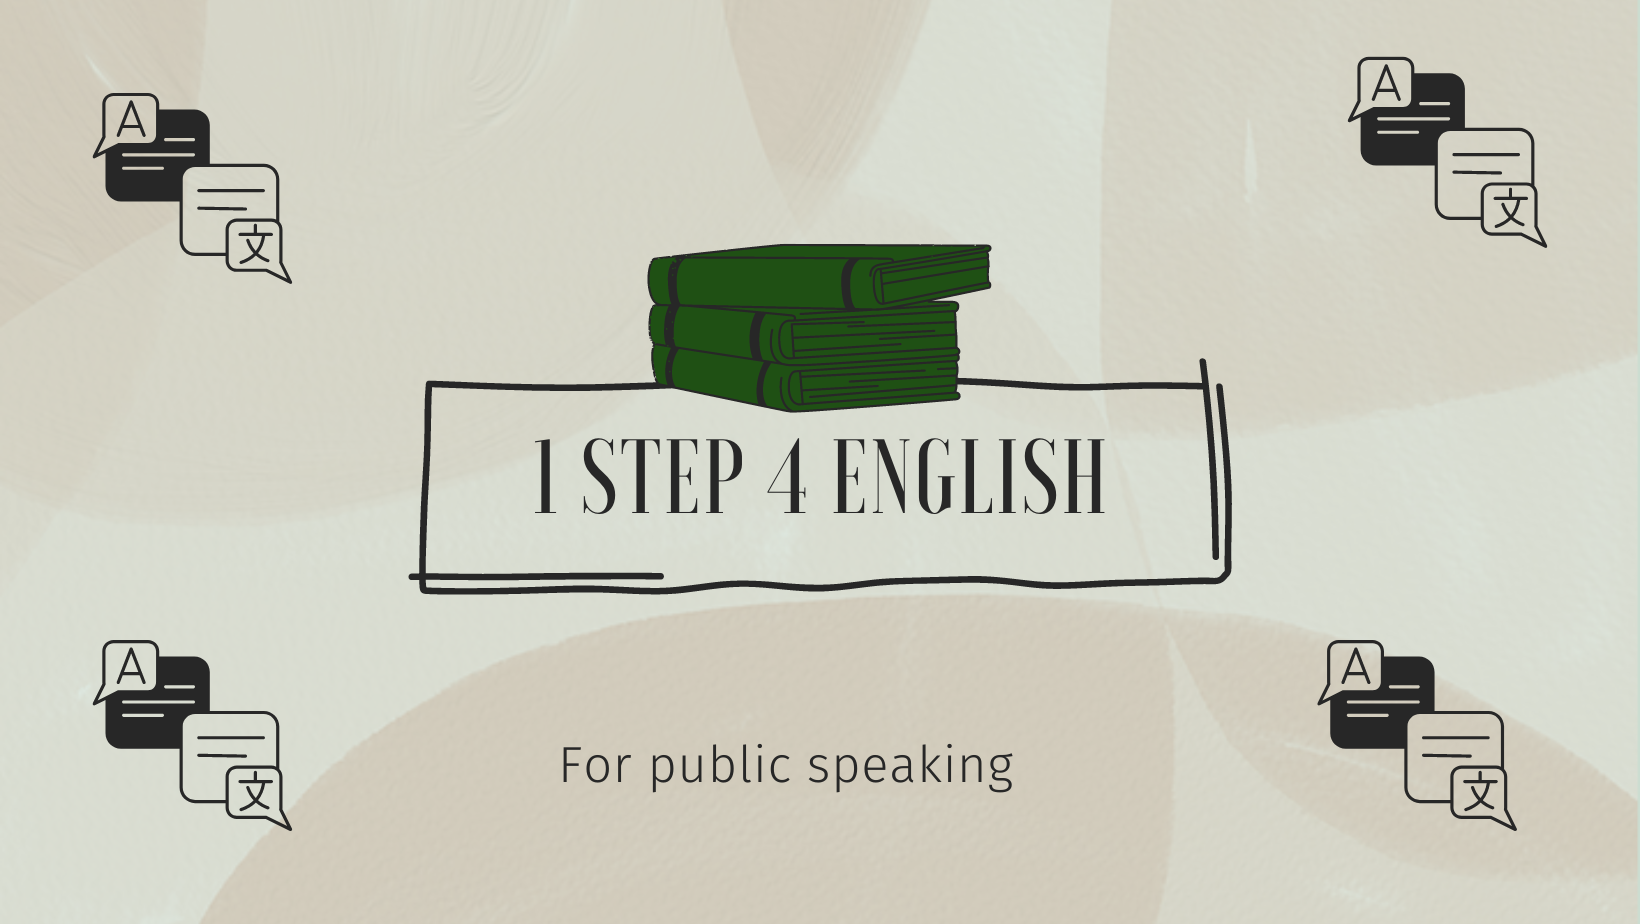 First step for English